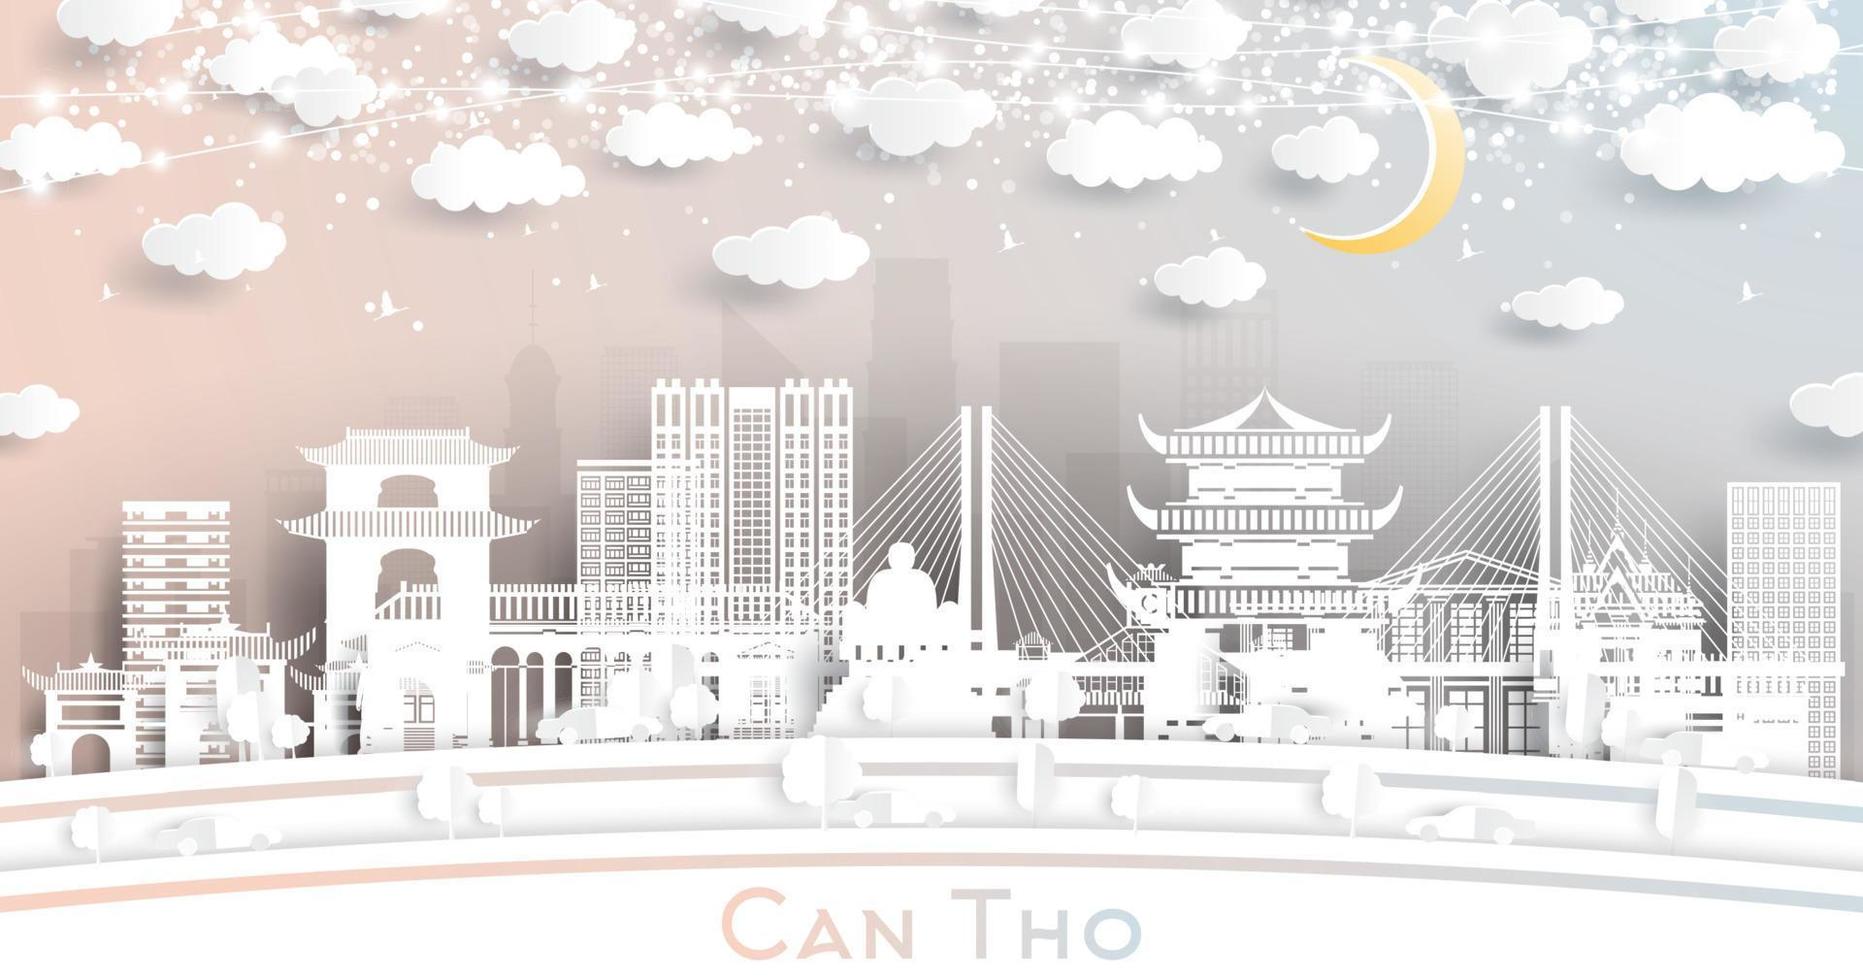 Can Tho Vietnam City Skyline in Paper Cut Style with White Buildings, Moon and Neon Garland. vector